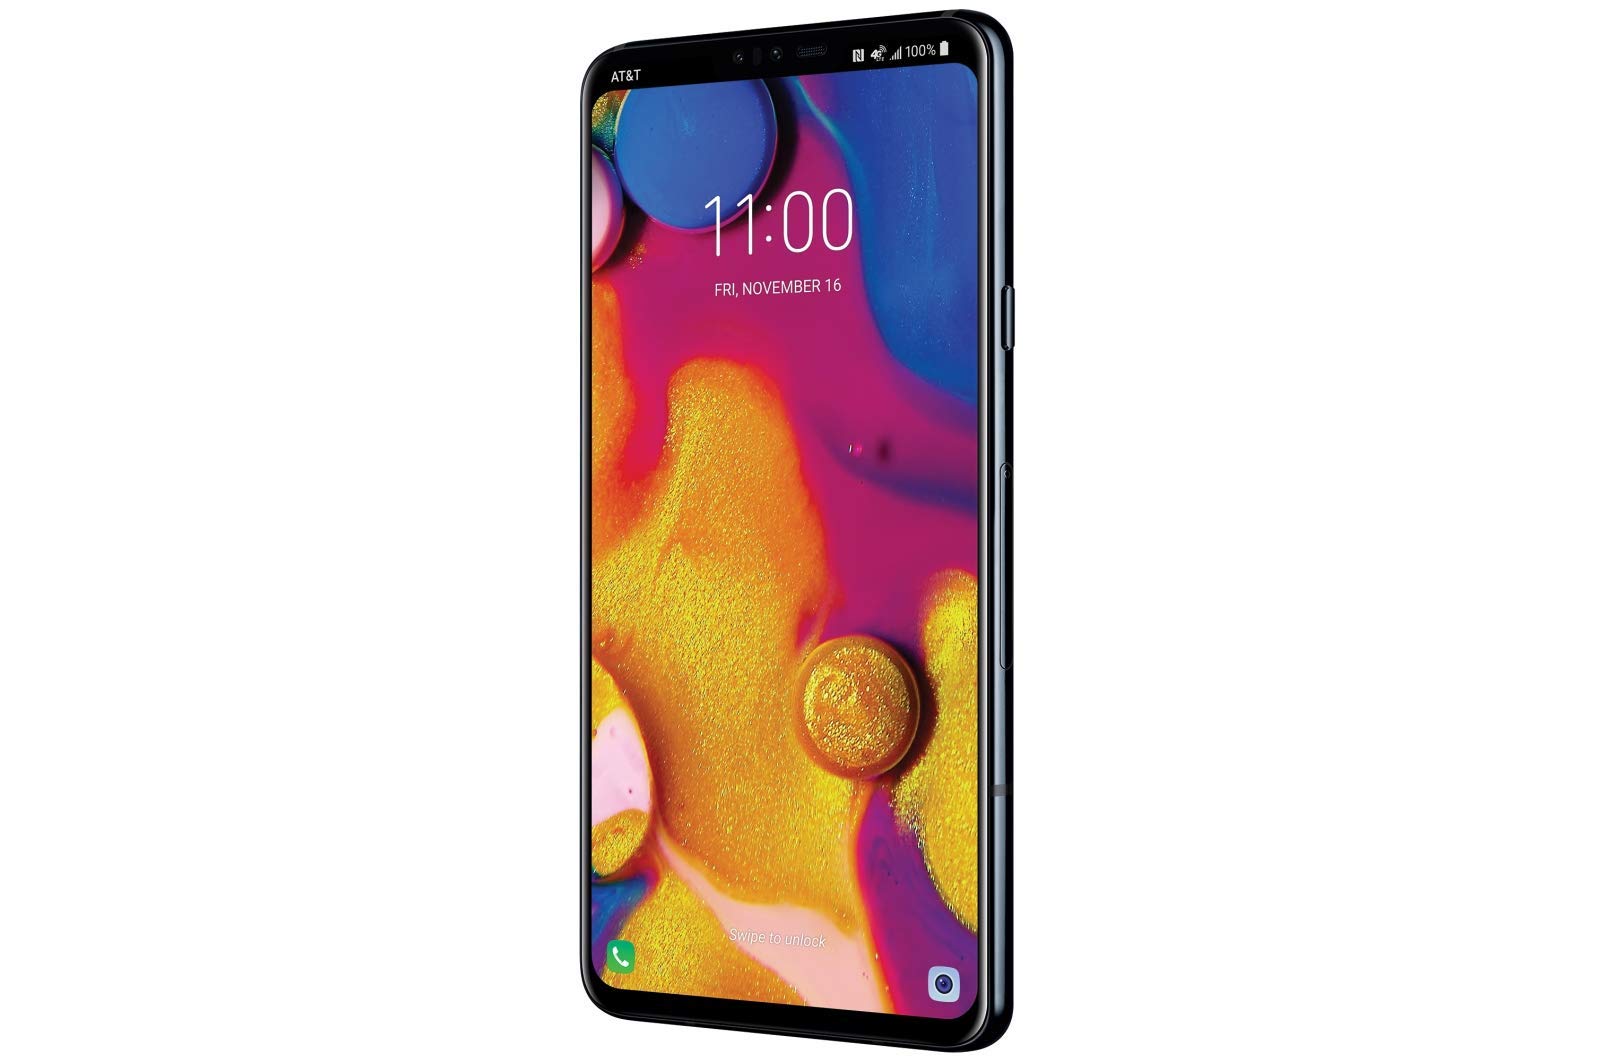 LG V40 ThinQ 64GB GSM Unlocked (AT&T/T-Mobile) 5-Camera Smartphone w/ 6.4